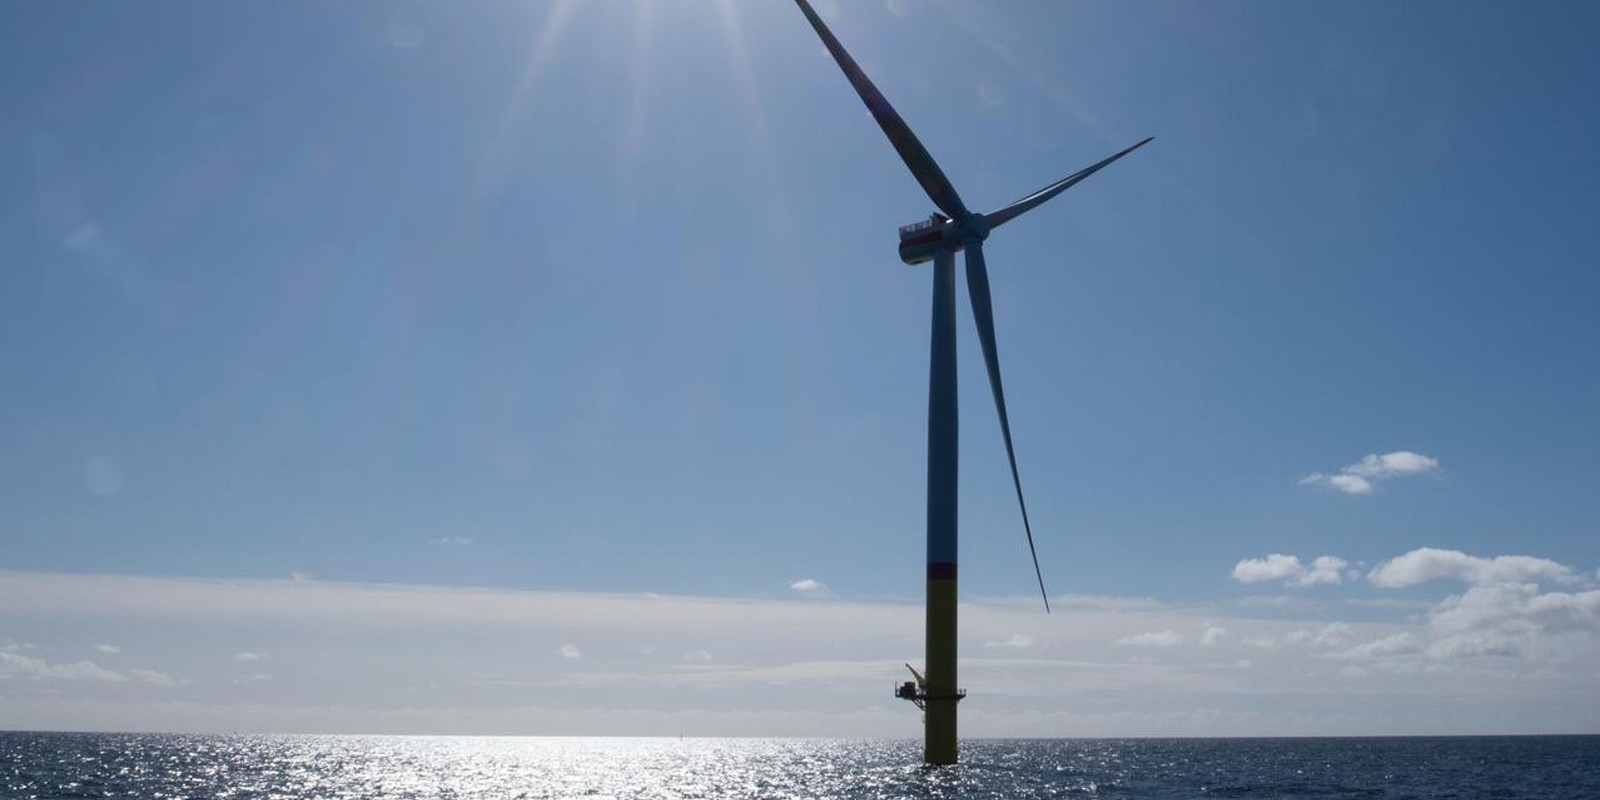 electrek.co - Michelle Lewis - The US just canceled the second Gulf of Mexico offshore wind lease sale